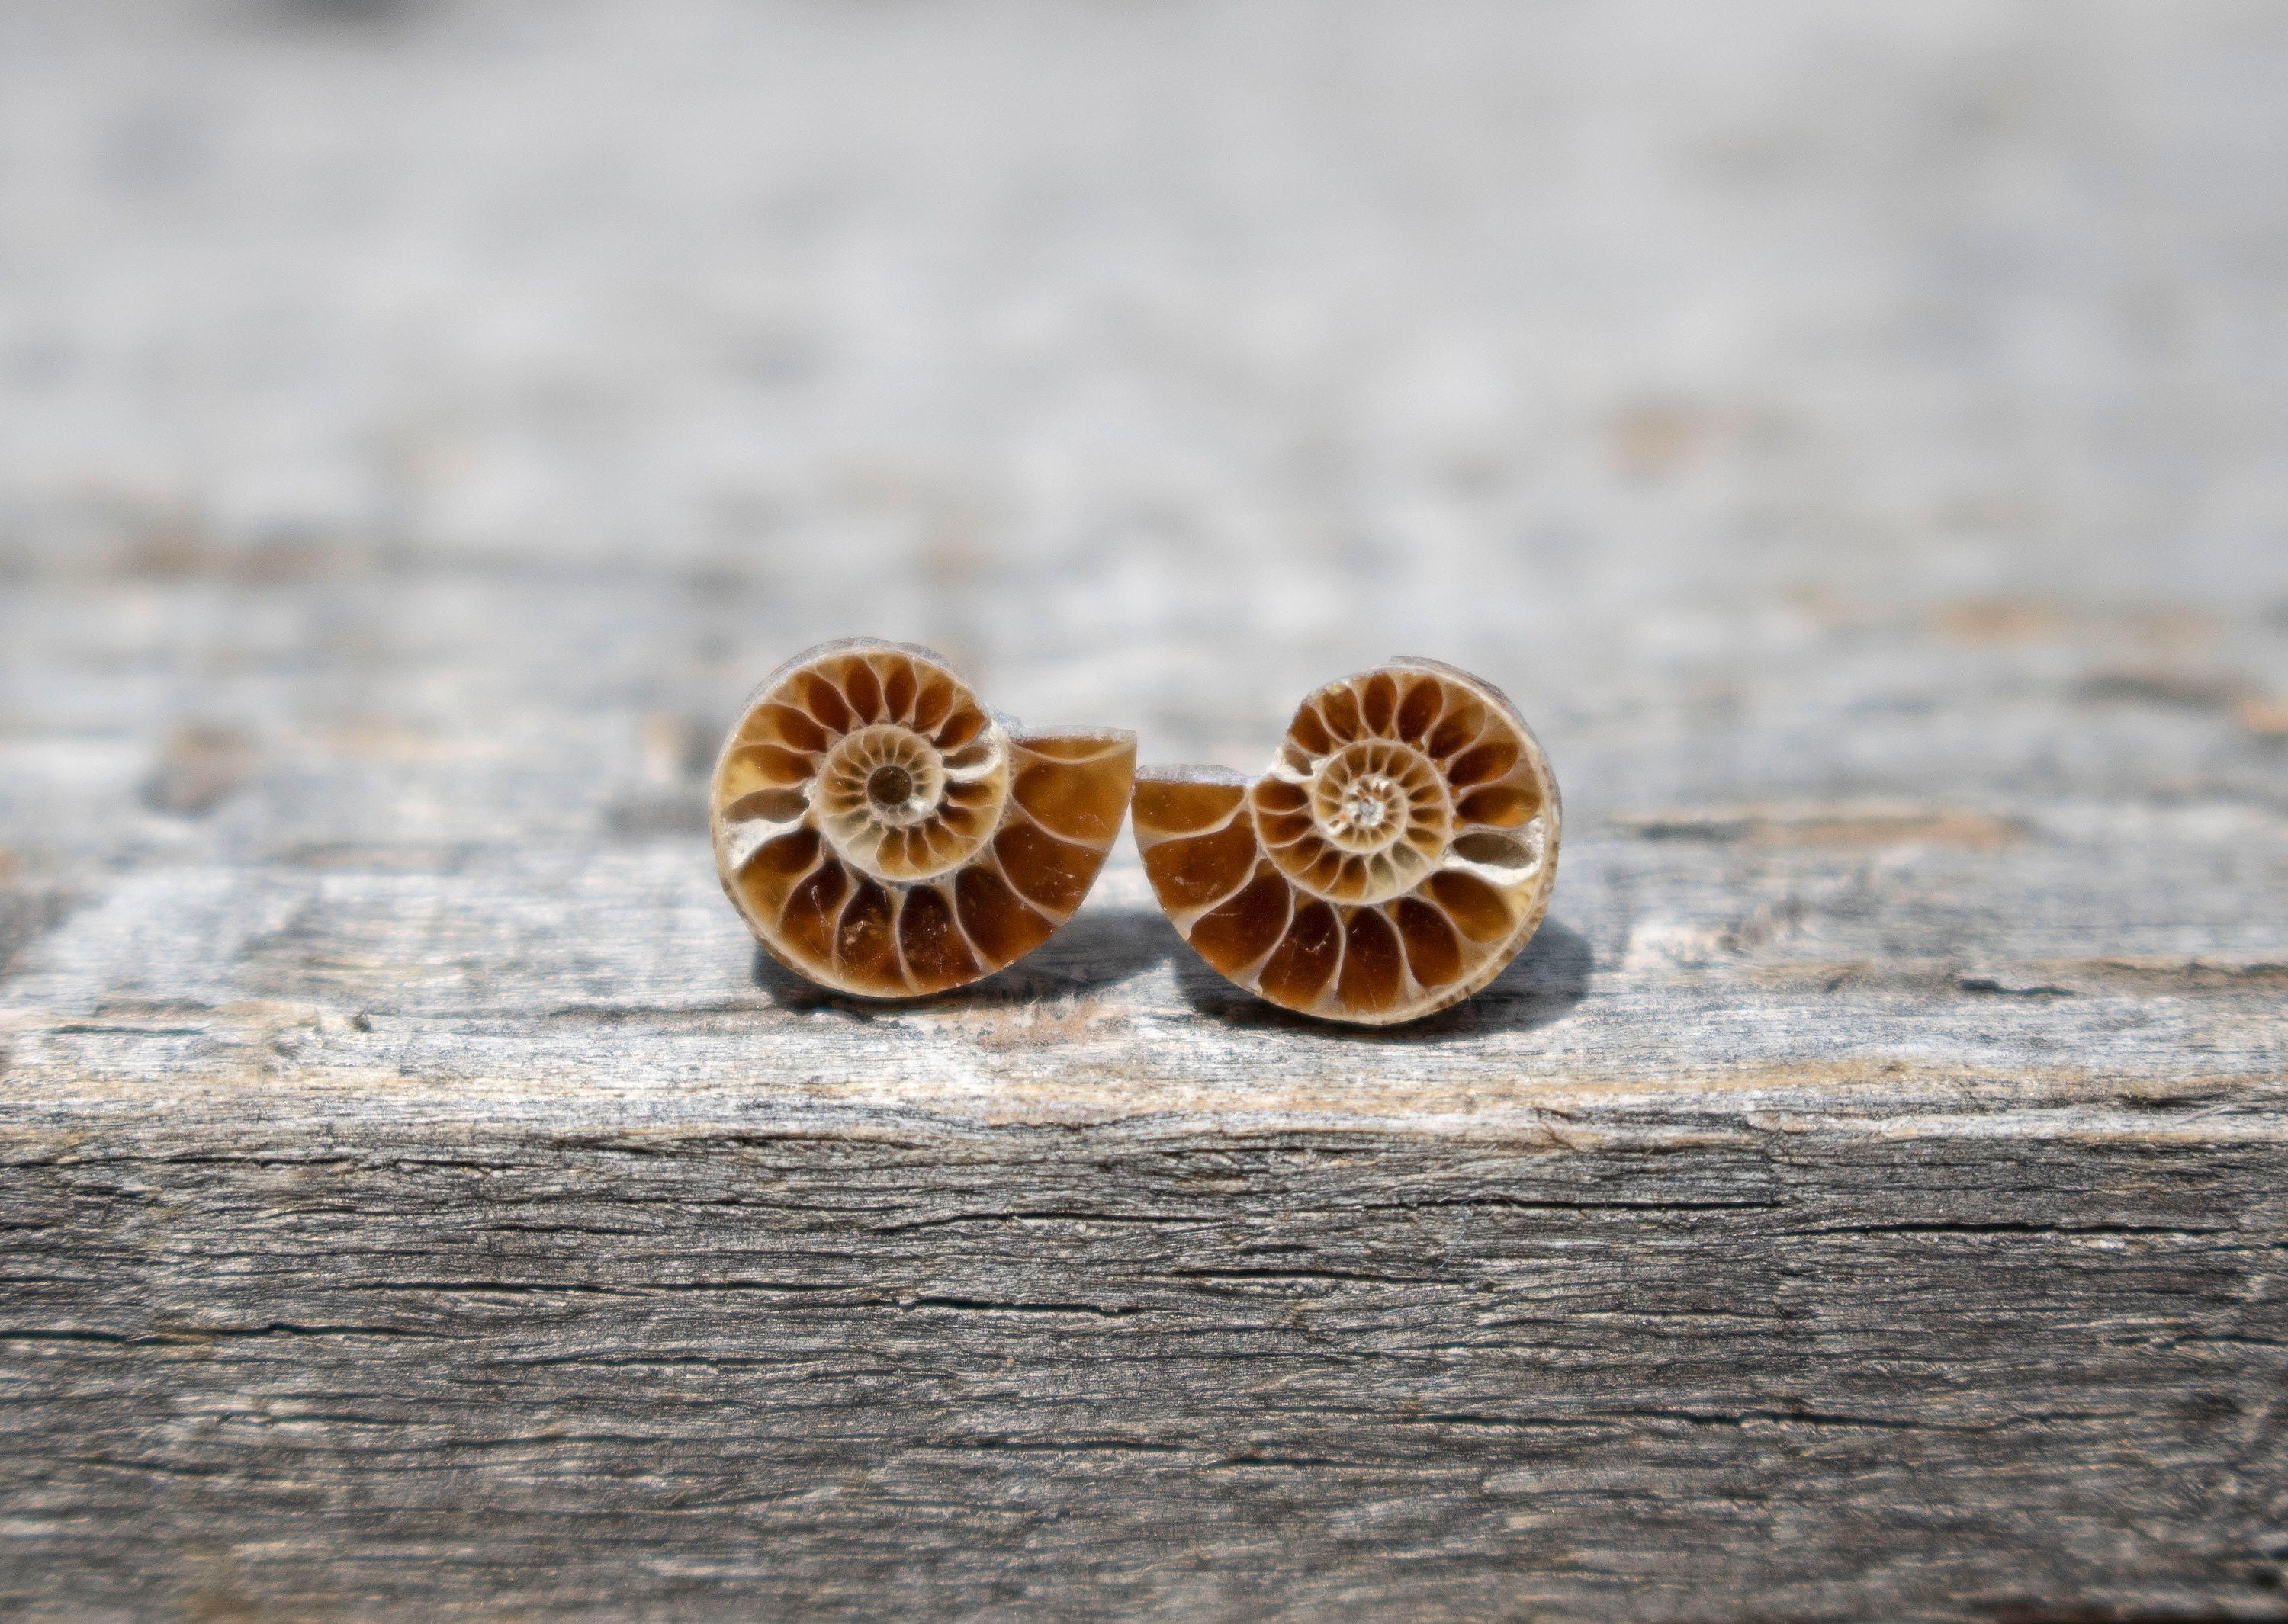 Most Loved New Batch Itty Bitty, Sweet Ammonite Slice Stud Earrings/Cabochon; Sterling Silver Studs | 19 Precious Pairs To Choose From